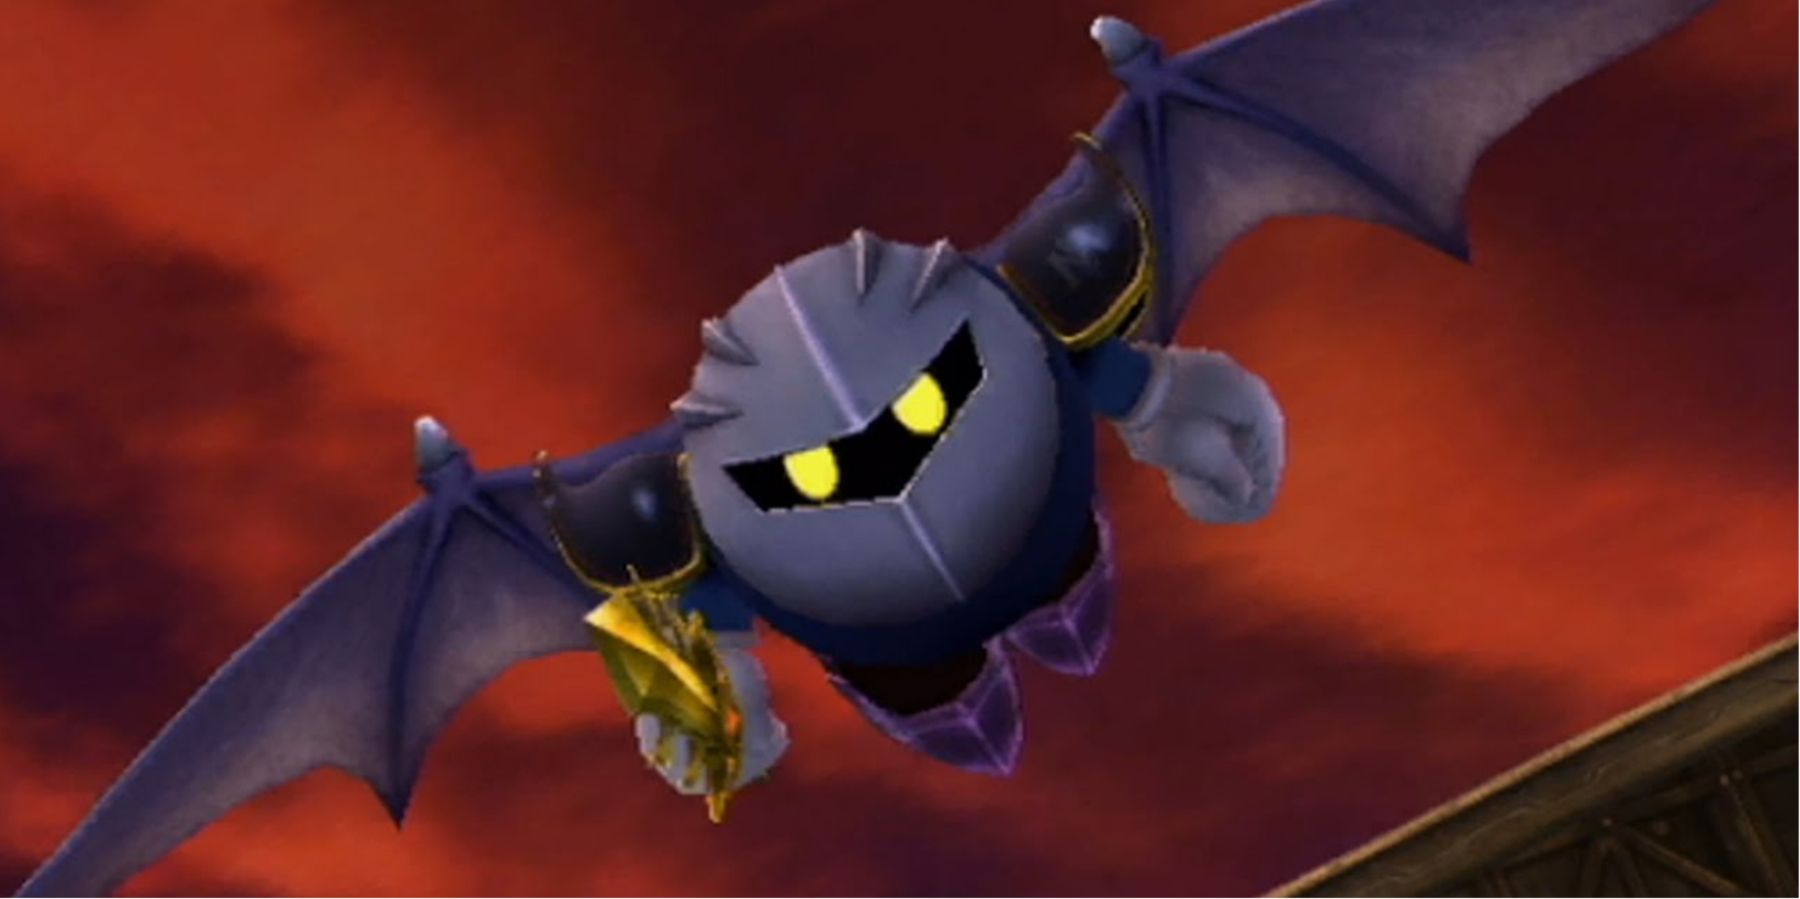 Super Smash Brothers Brawl Meta Knight Diving From The Air